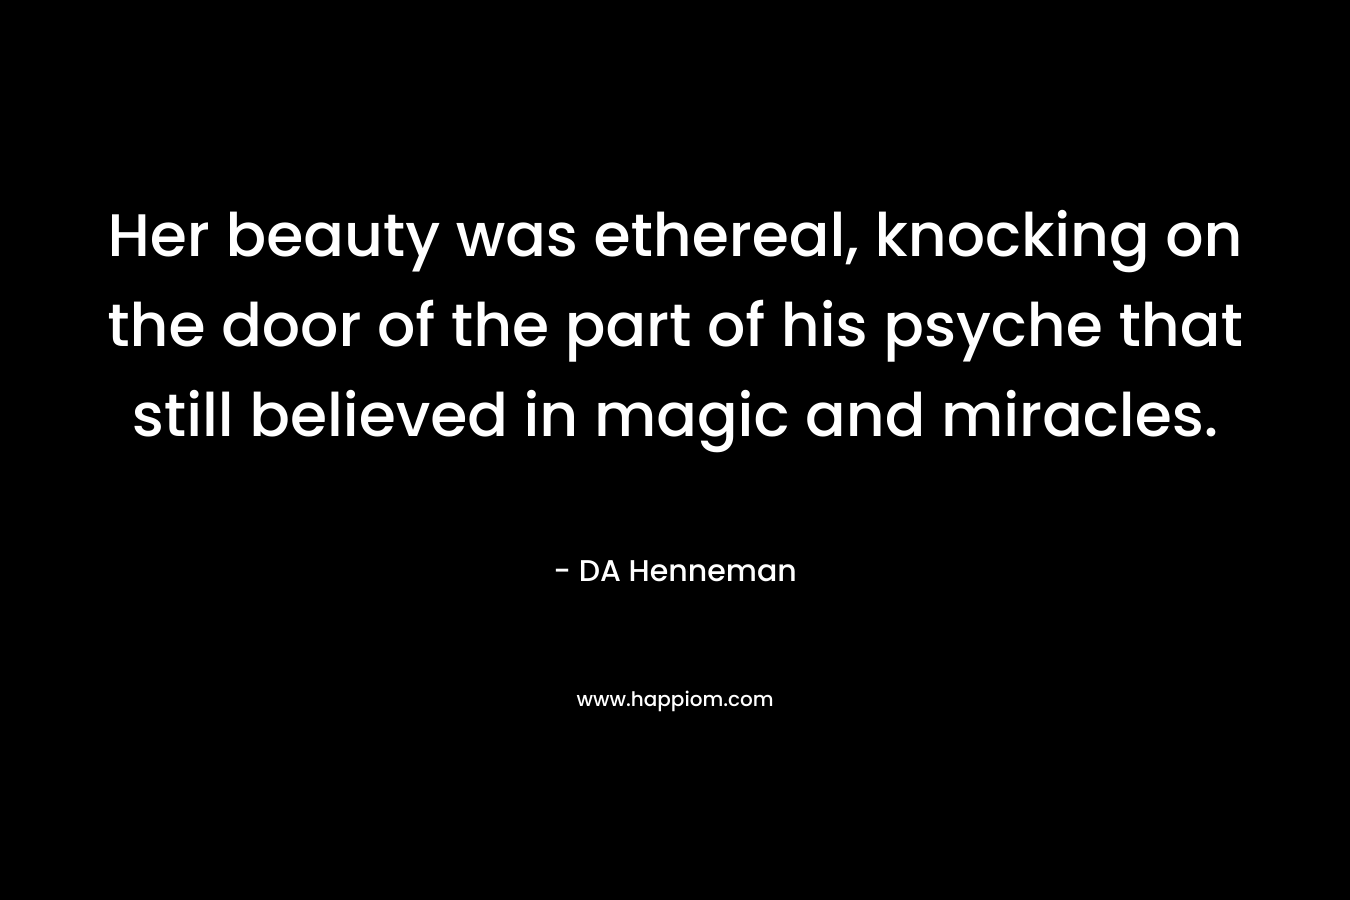 Her beauty was ethereal, knocking on the door of the part of his psyche that still believed in magic and miracles.